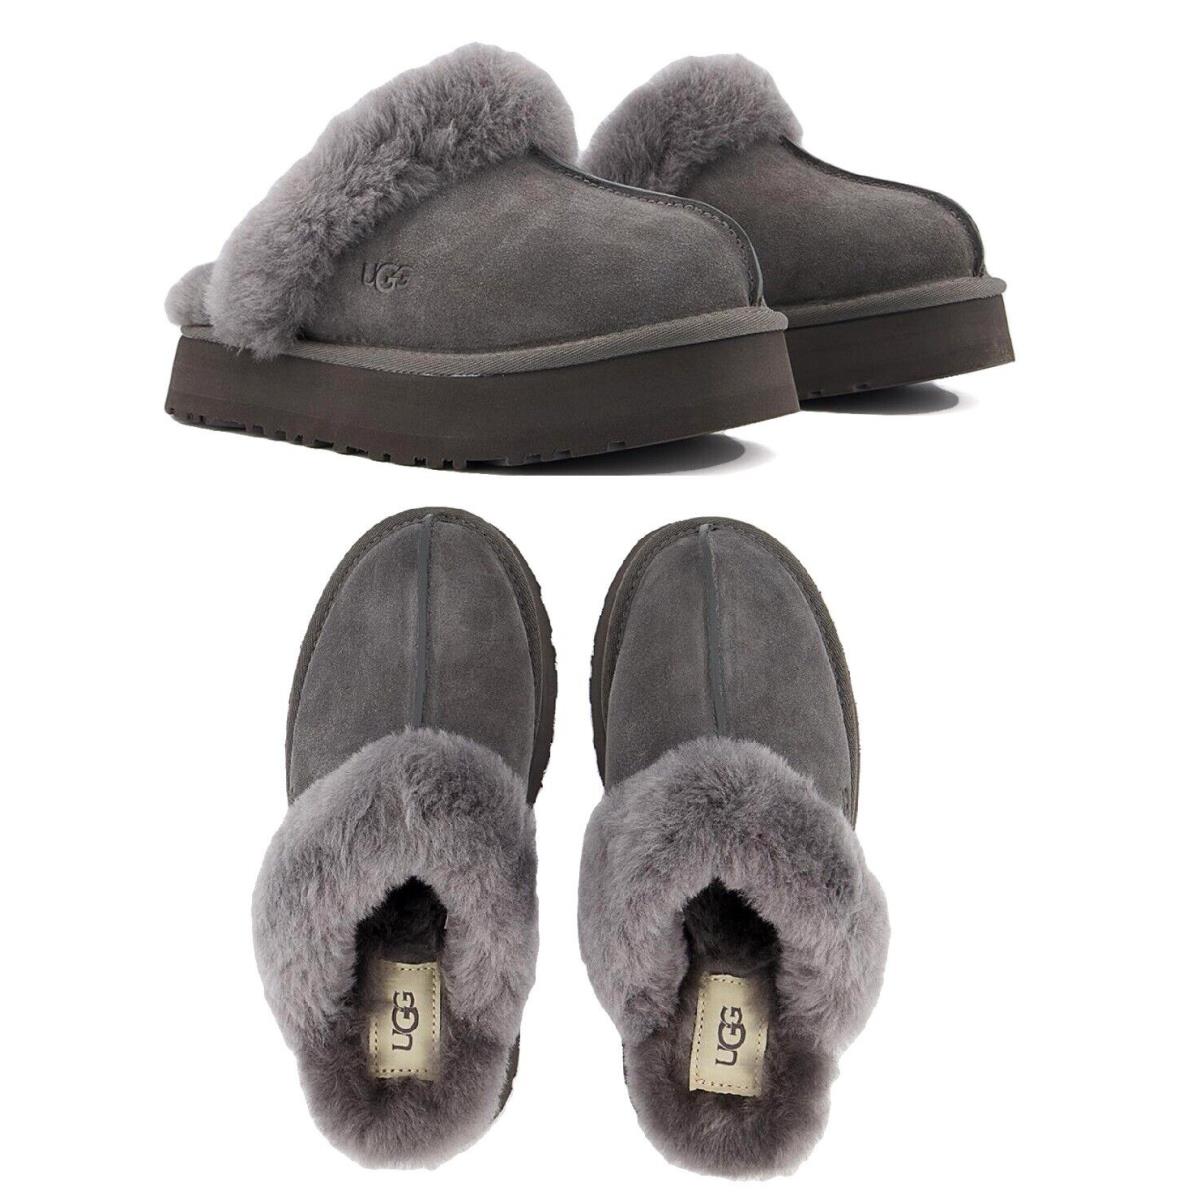 Ugg Disquette 1122550 Charcoal Women Shoes Slippers Sandals - Gray